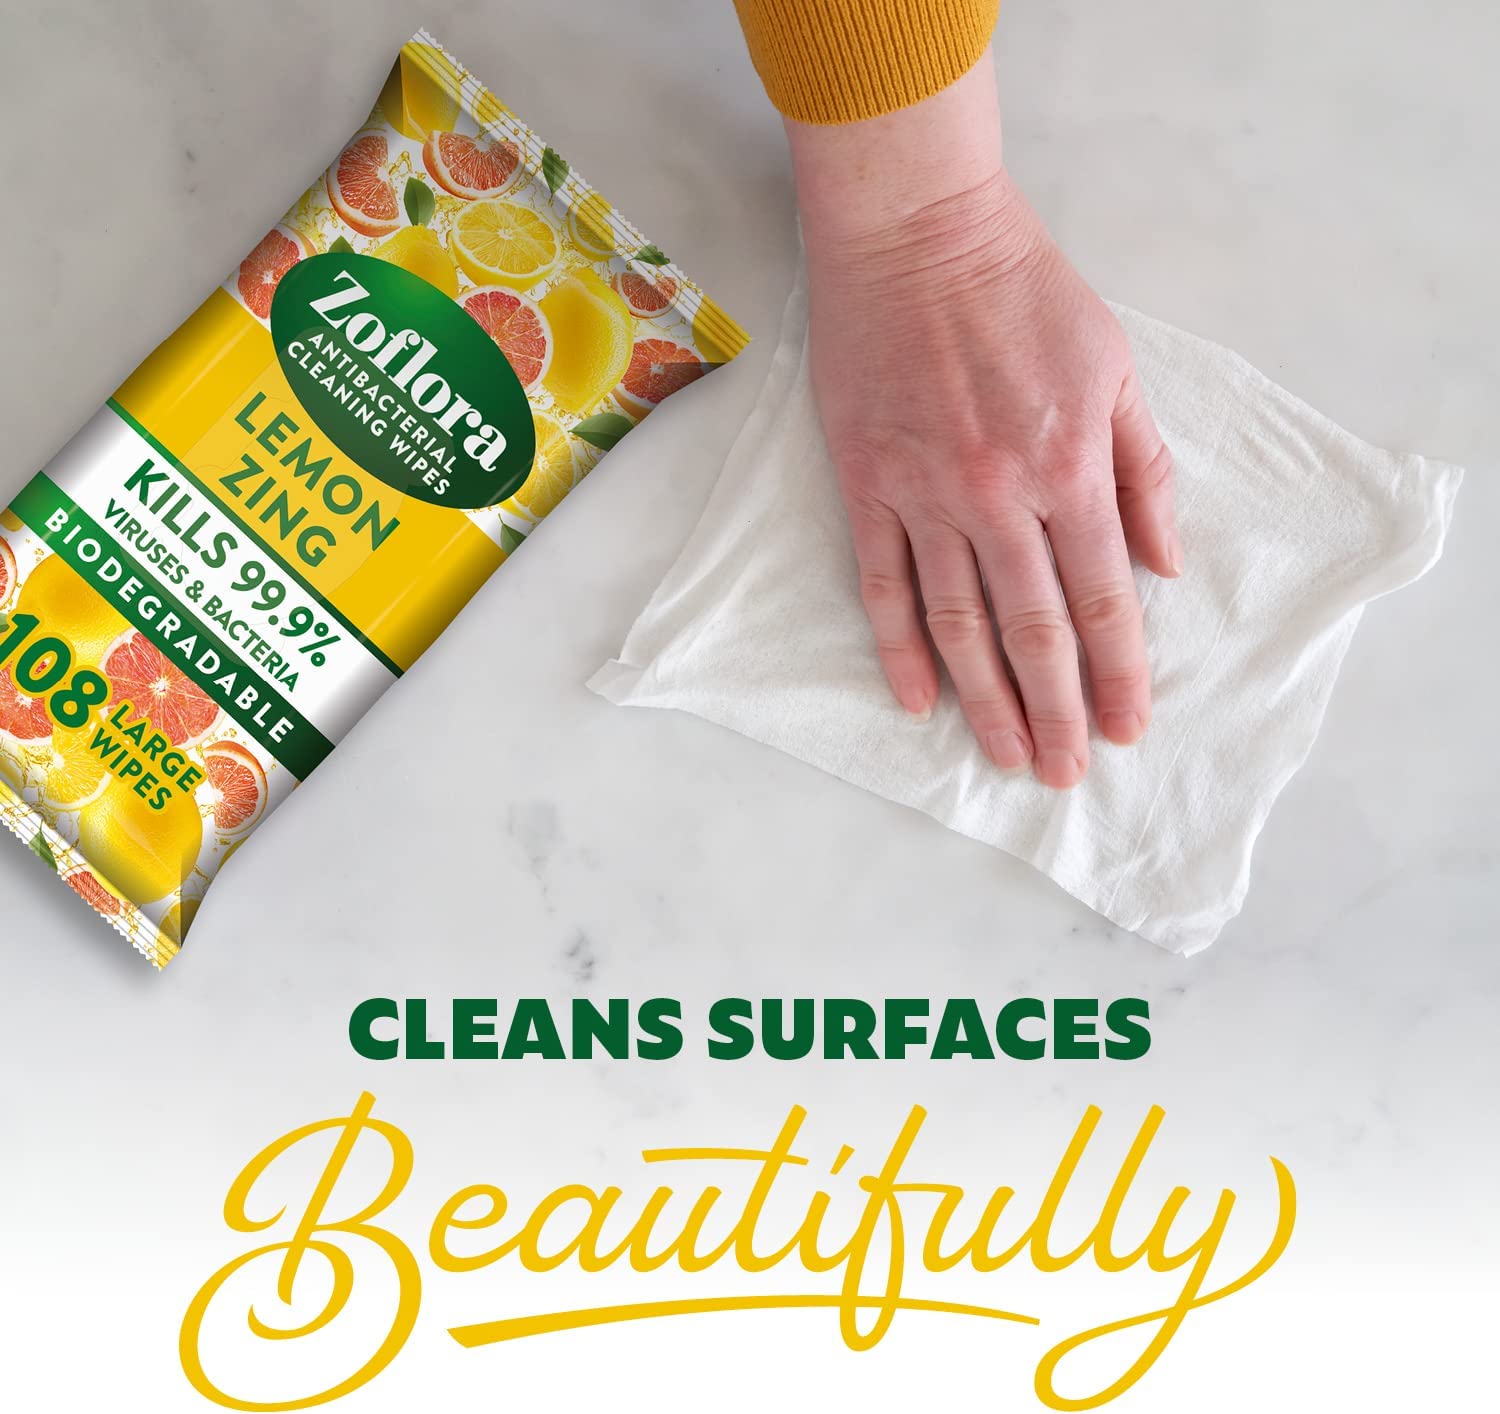 Zoflora Midnight Blooms 108 Large Wipes, Antibacterial Multi-surface Cleaning Wipes Convenient, Quick Cleaning